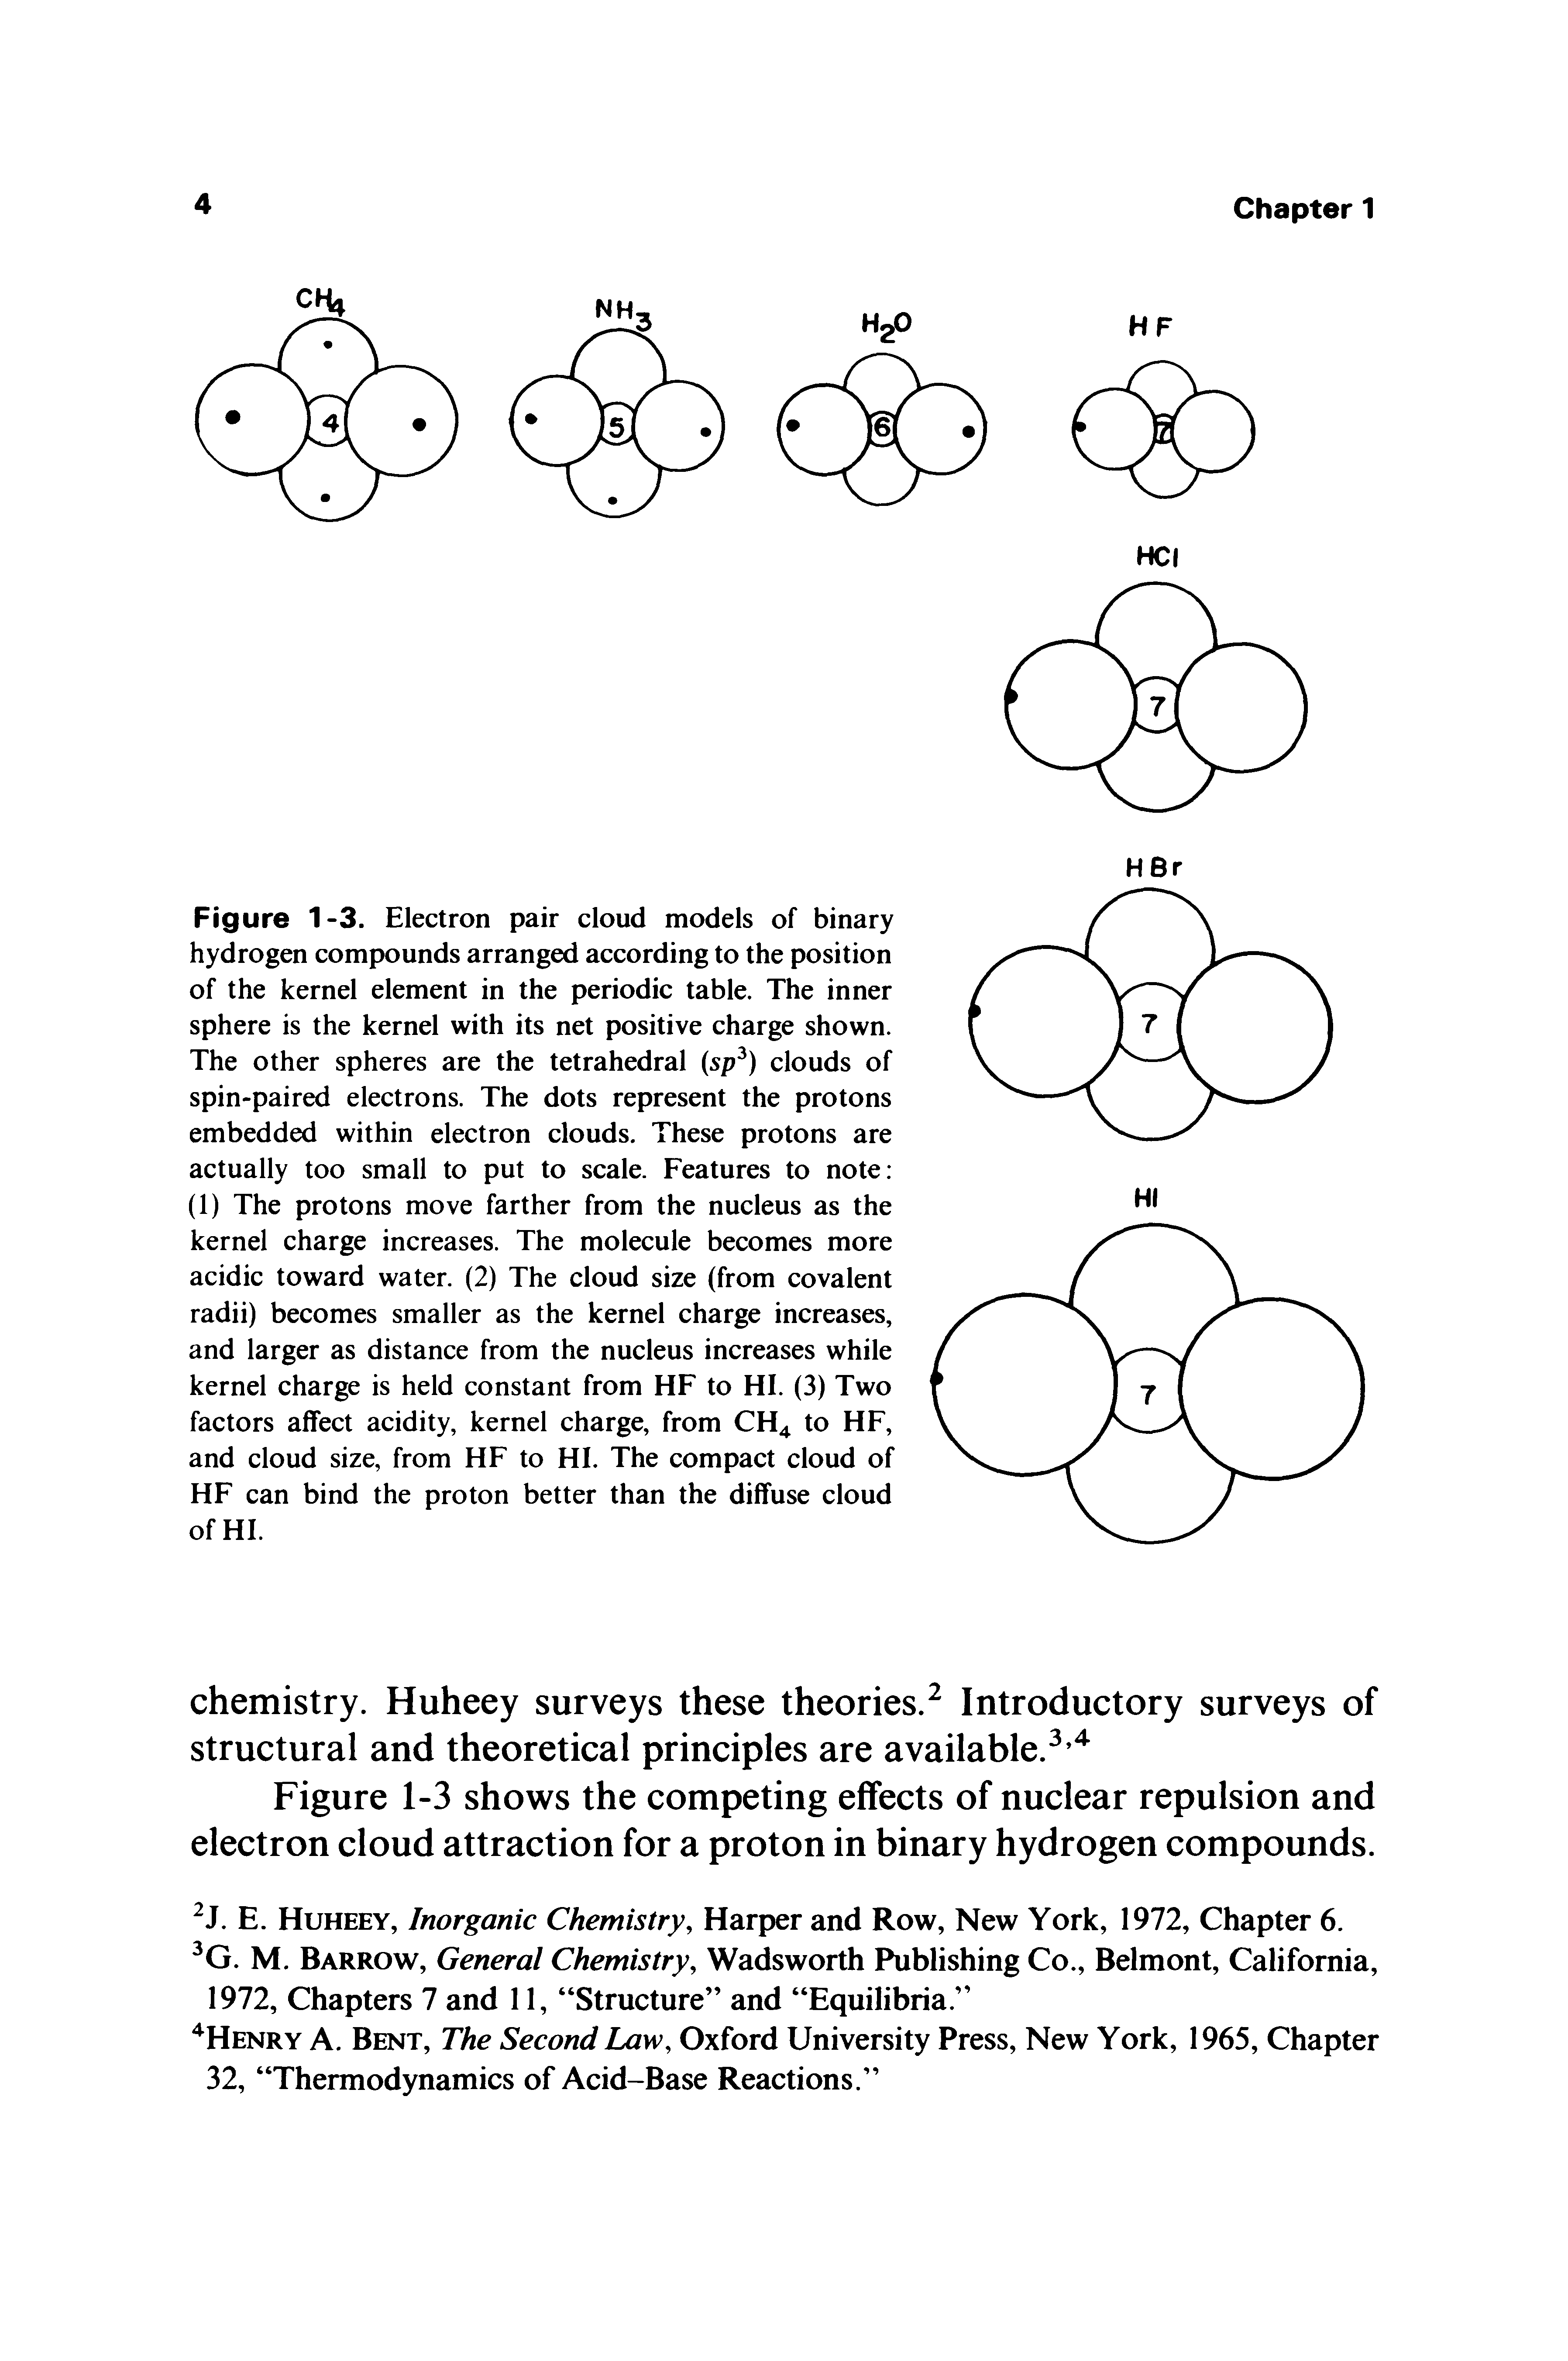 Figure 1-3. Electron pair cloud models of binary hydrogen compounds arranged according to the position of the kernel element in the periodic table. The inner sphere is the kernel with its net positive charge shown. The other spheres are the tetrahedral (sp ) clouds of spin-paired electrons. The dots represent the protons embedded within electron clouds. These protons are actually too small to put to scale. Features to note (1) The protons move farther from the nucleus as the kernel charge increases. The molecule becomes more acidic toward water. (2) The cloud size (from covalent radii) becomes smaller as the kernel charge increases, and larger as distance from the nucleus increases while kernel charge is held constant from HF to HI. (3) Two factors affect acidity, kernel charge, from CH4 to HF, and cloud size, from HF to HI. The compact cloud of HF can bind the proton better than the diffuse cloud of HI.